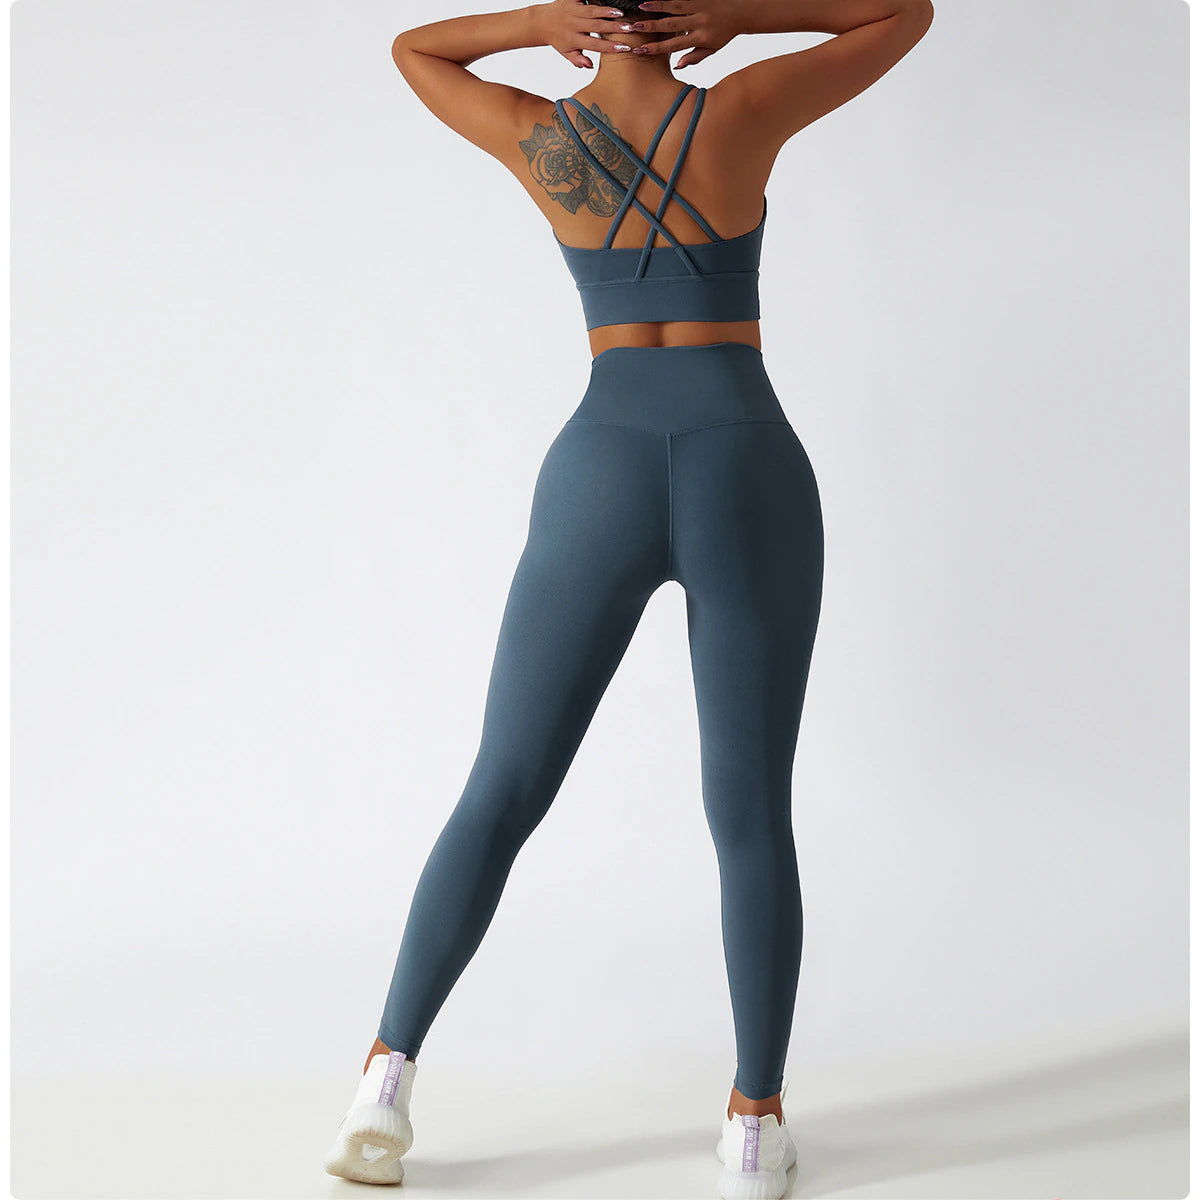 Women's Vitality Set in breathable nylon/spandex blend. Seamless high-waisted leggings for a flattering fit. Strappy sports bra with removable pads. Quick-drying material for comfort during workouts. Stylish and functional – a must-have for any active woman's wardrobe.